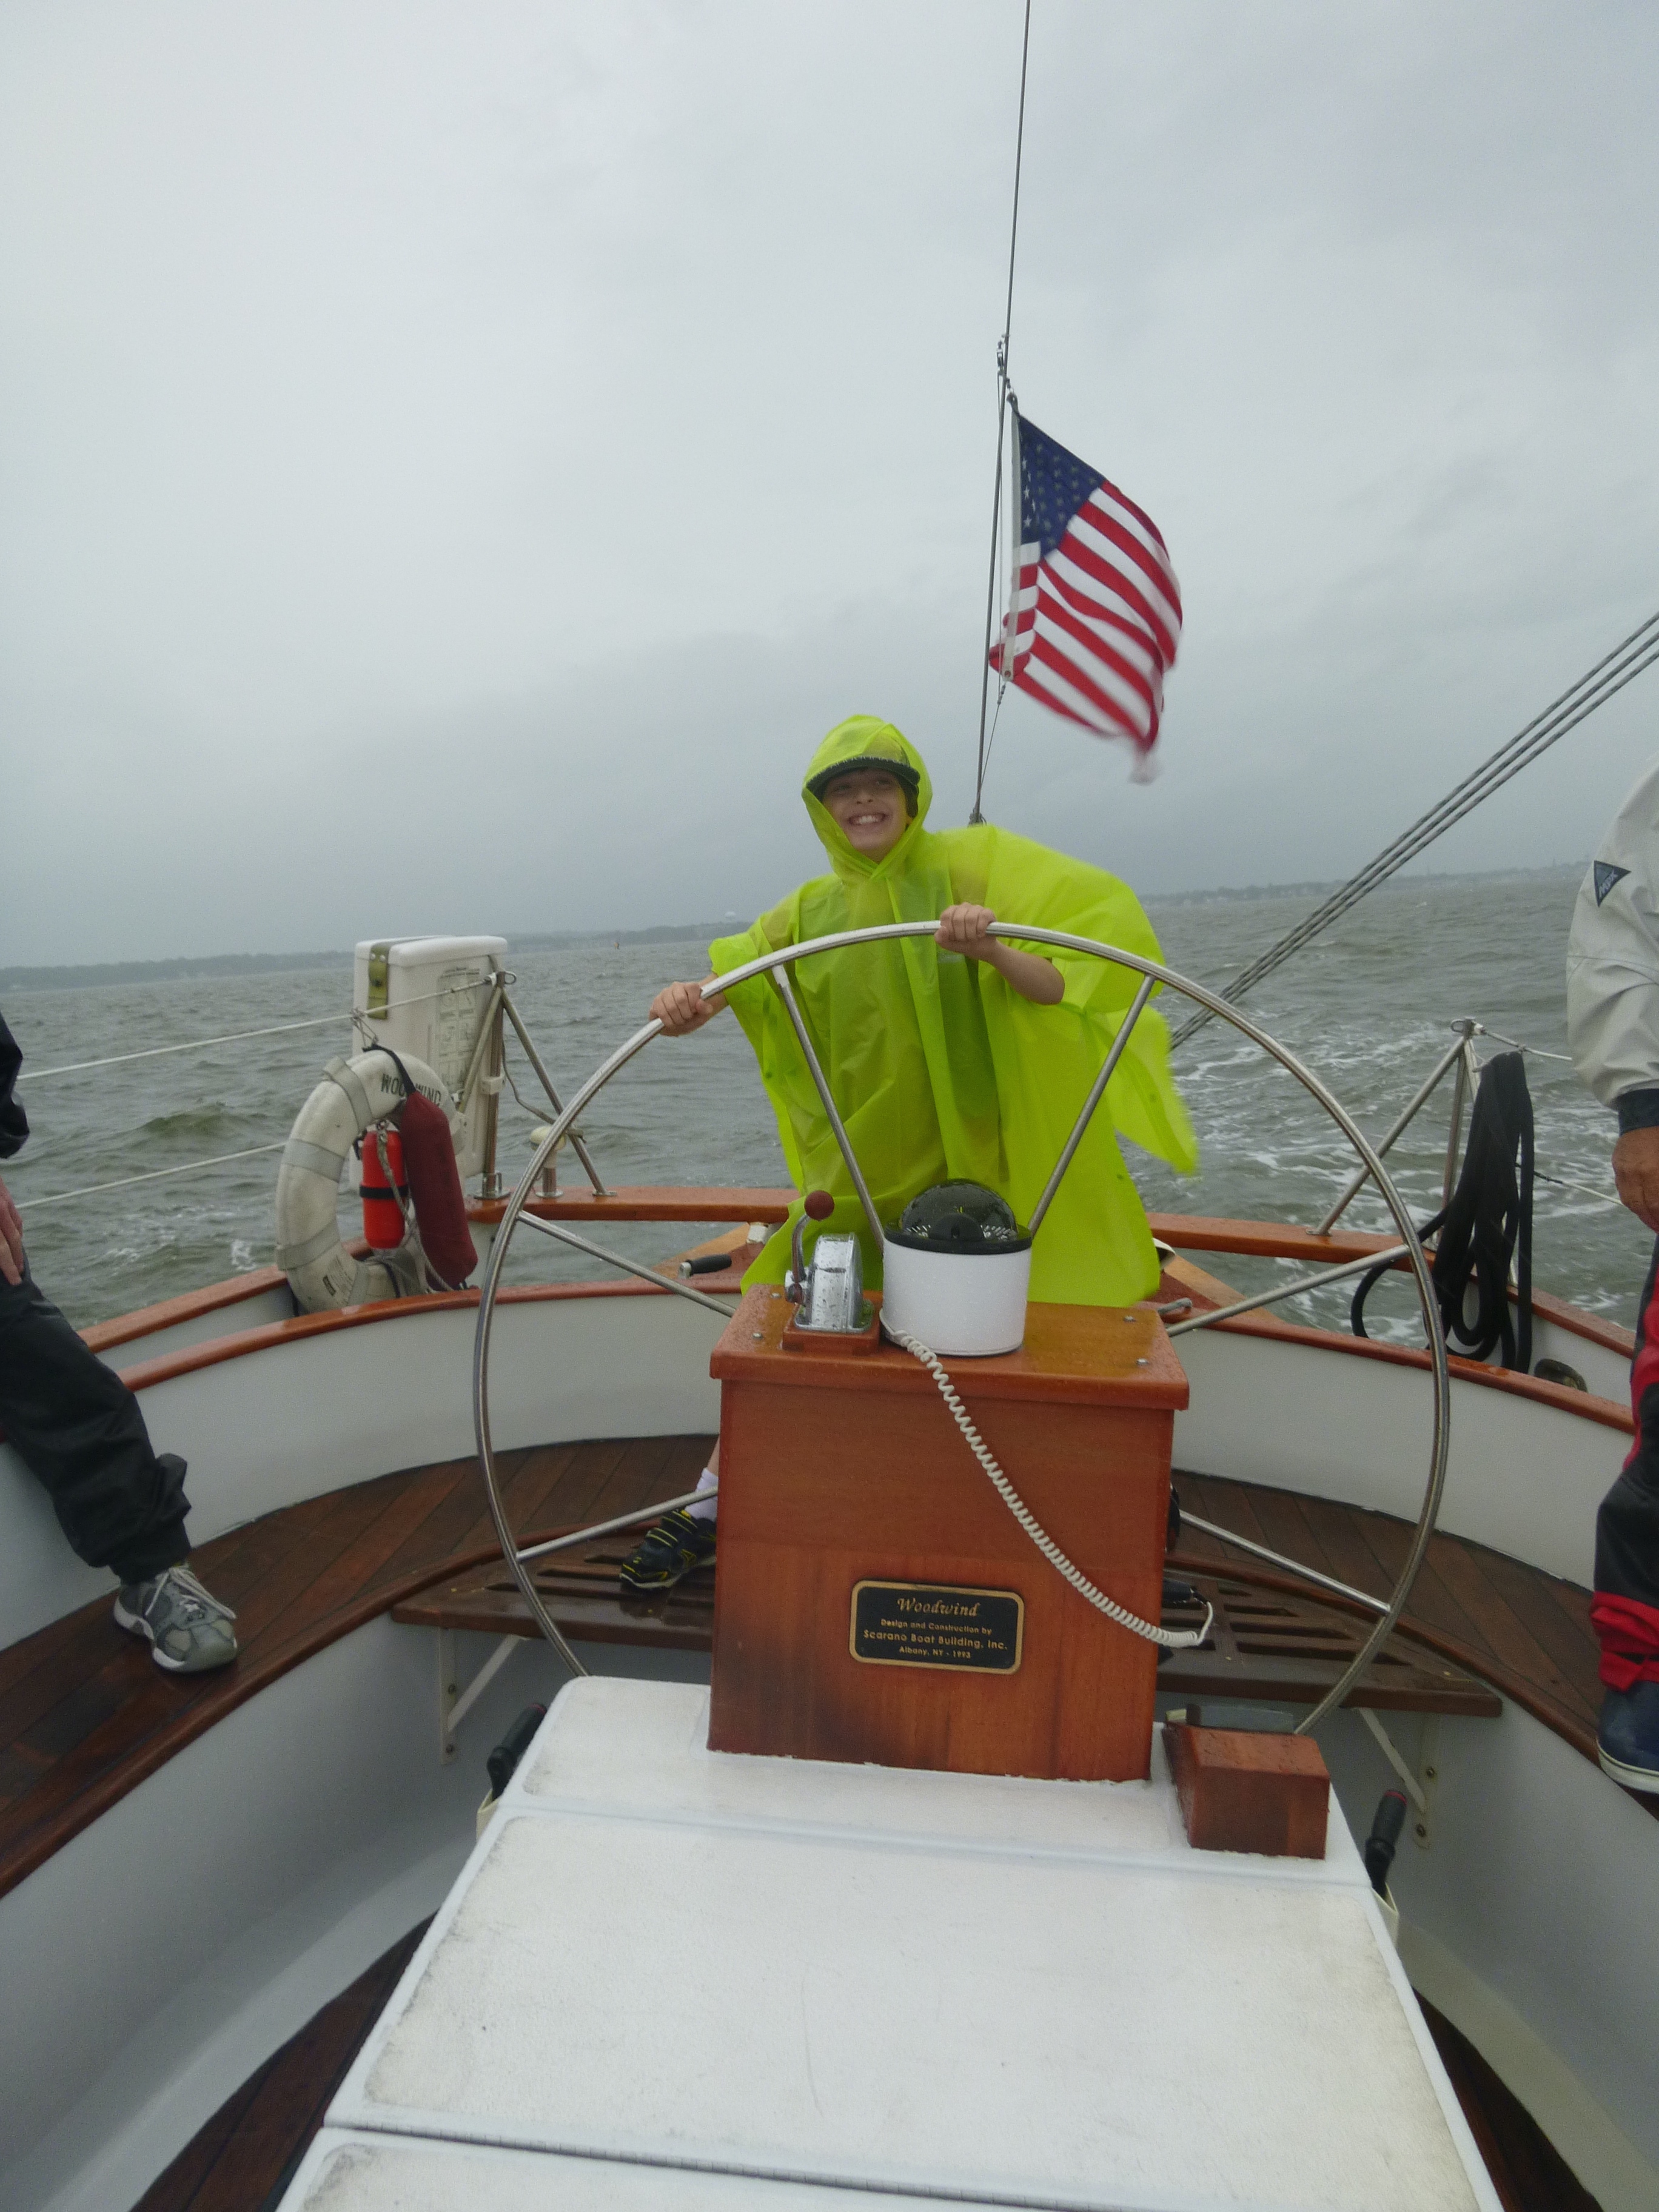 Guest sailing the schooner with a bright green poncho on a stormy day